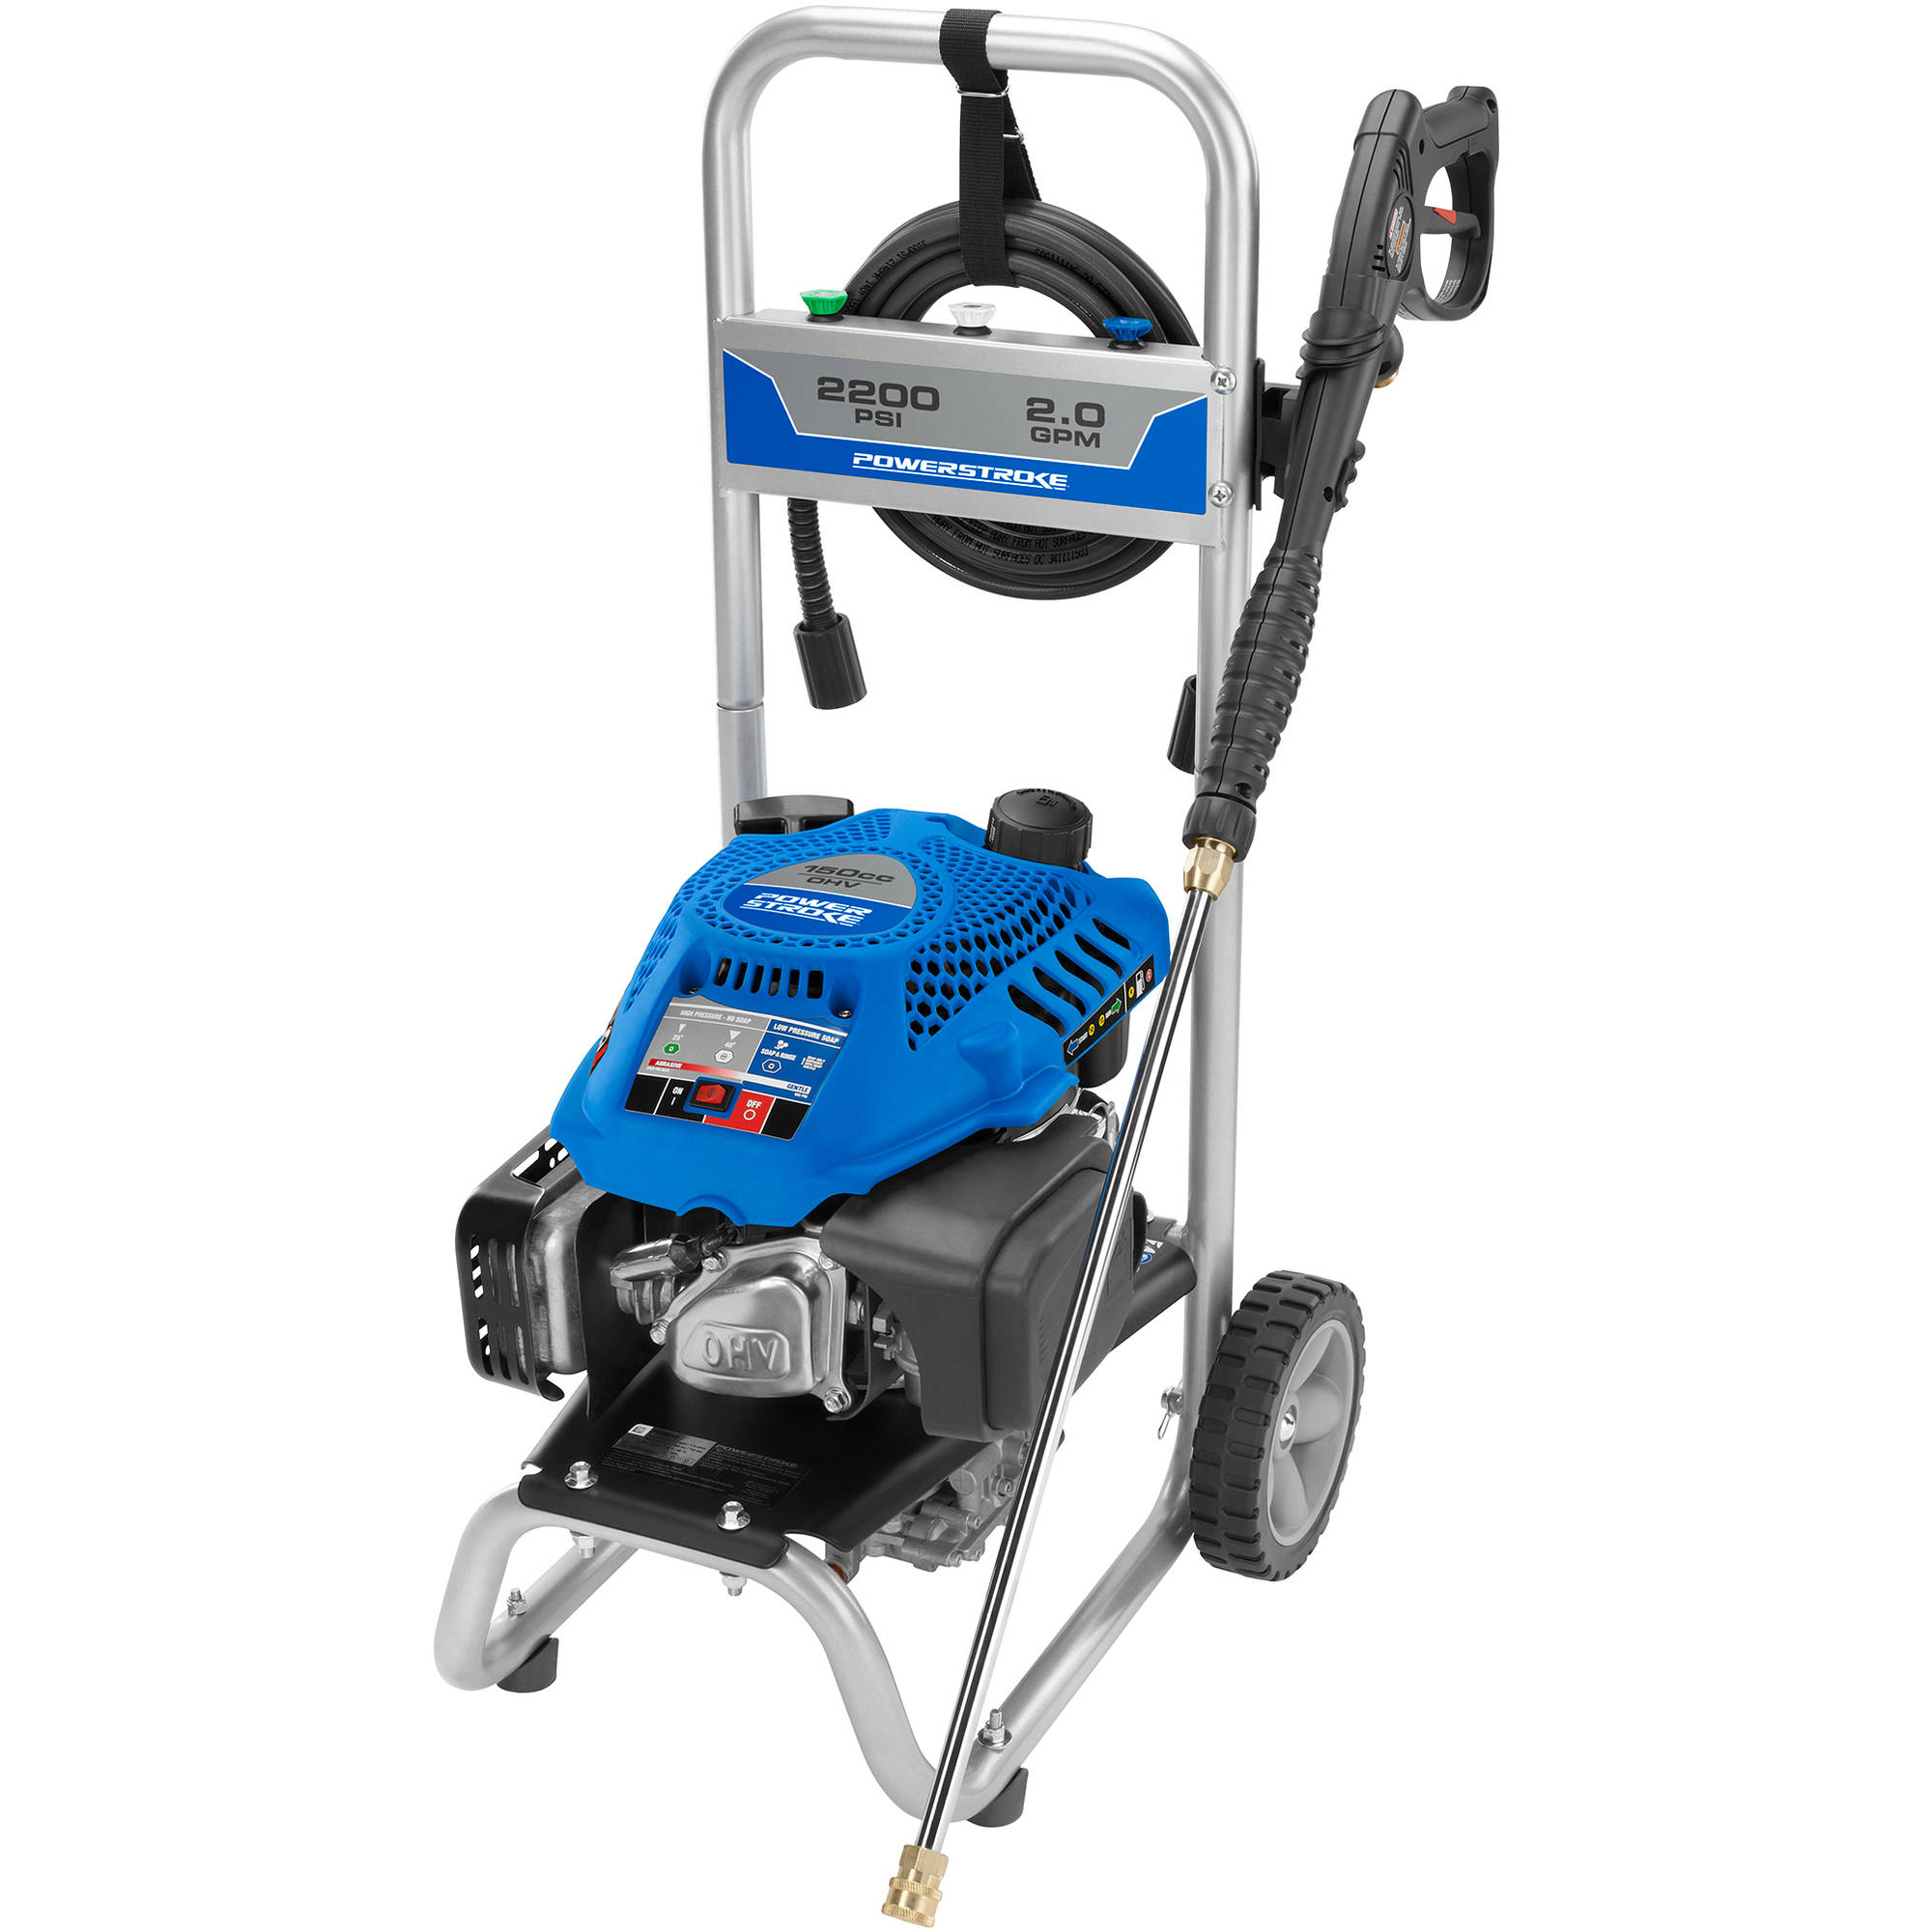 Powerstroke 2200 PSI Gas Pressure Washer - image 1 of 5